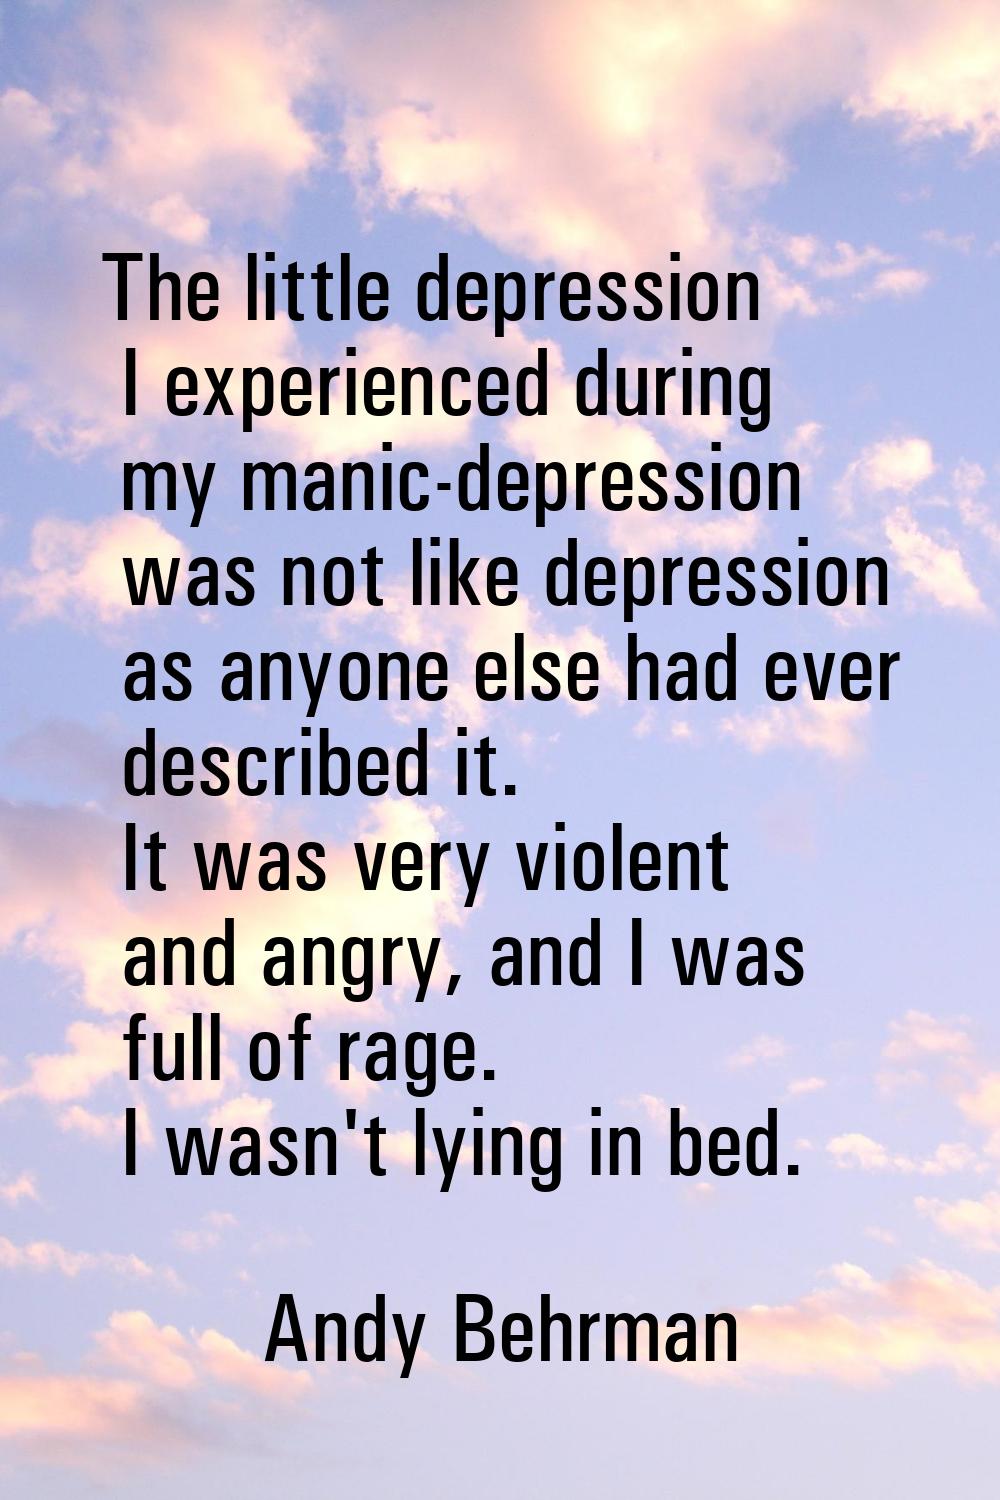 The little depression I experienced during my manic-depression was not like depression as anyone el